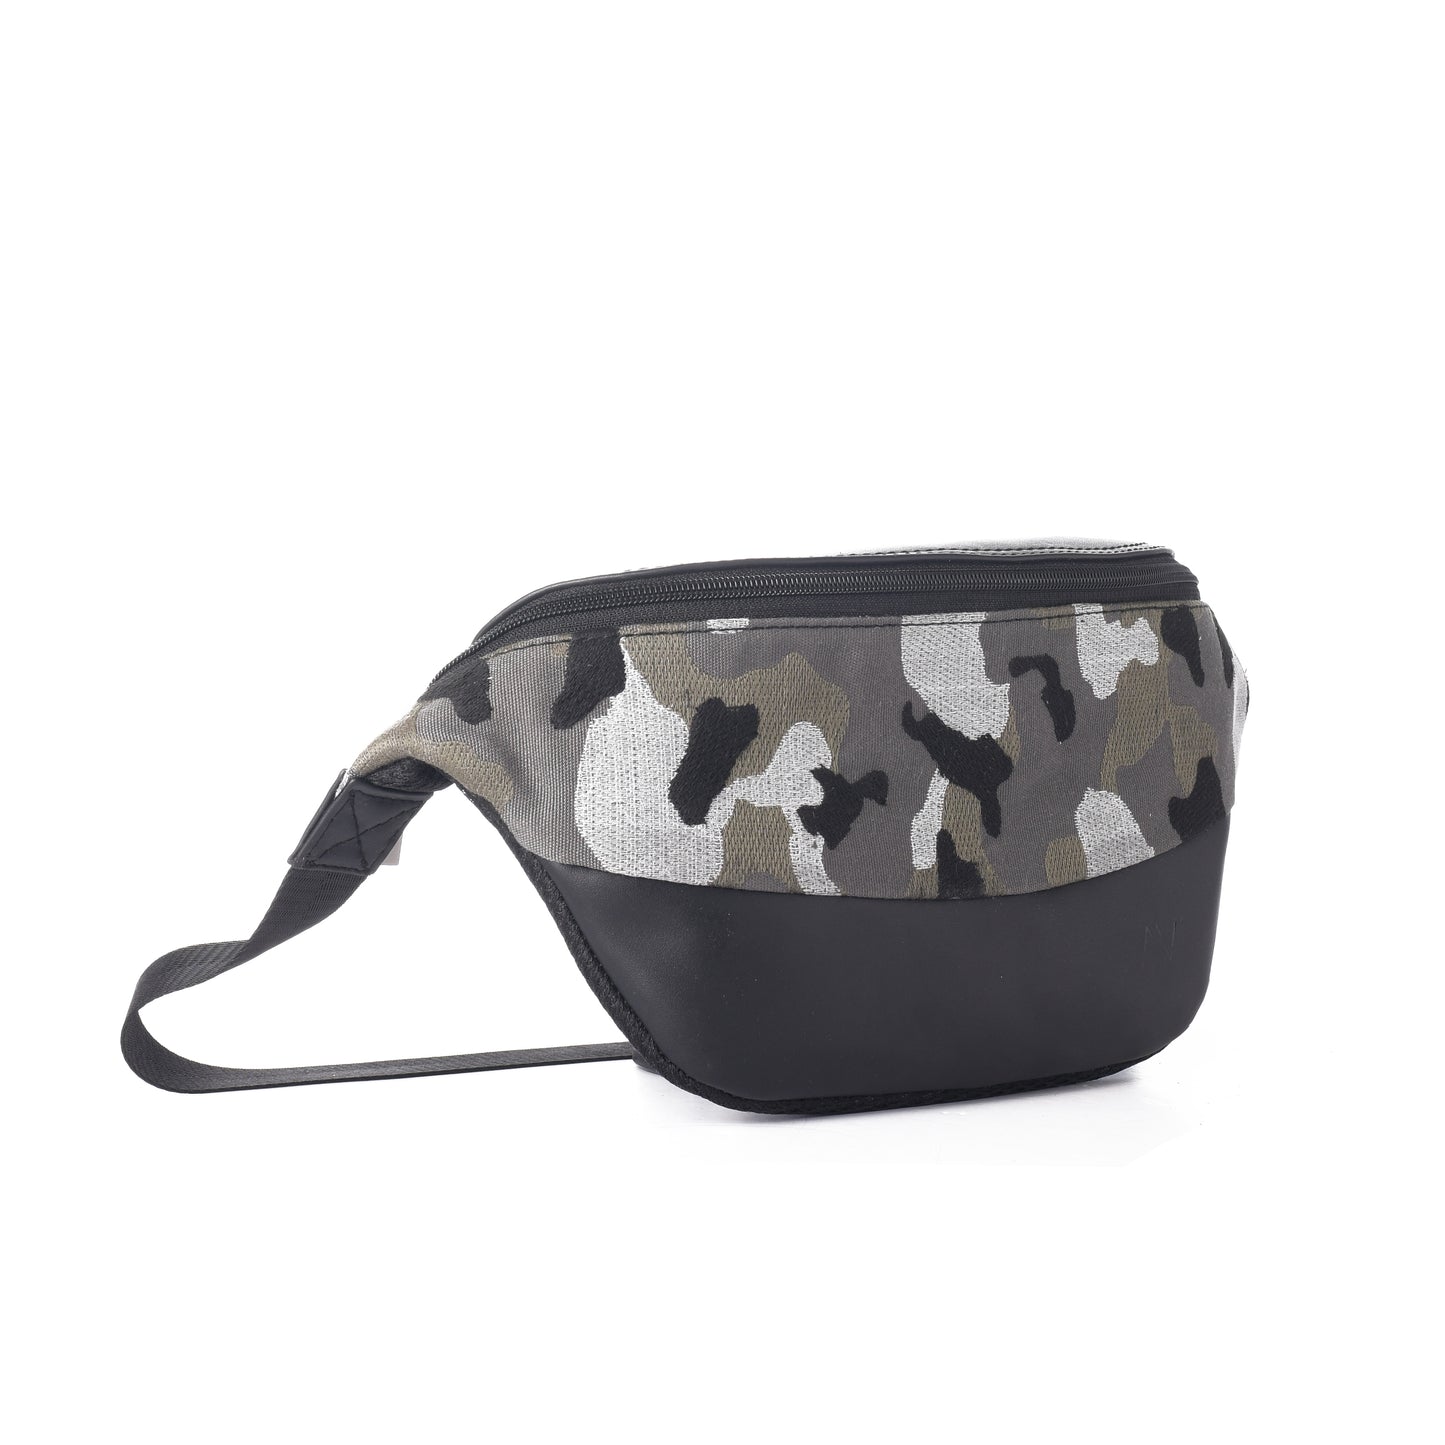 Fanny pack - Black with Olive Army pattern